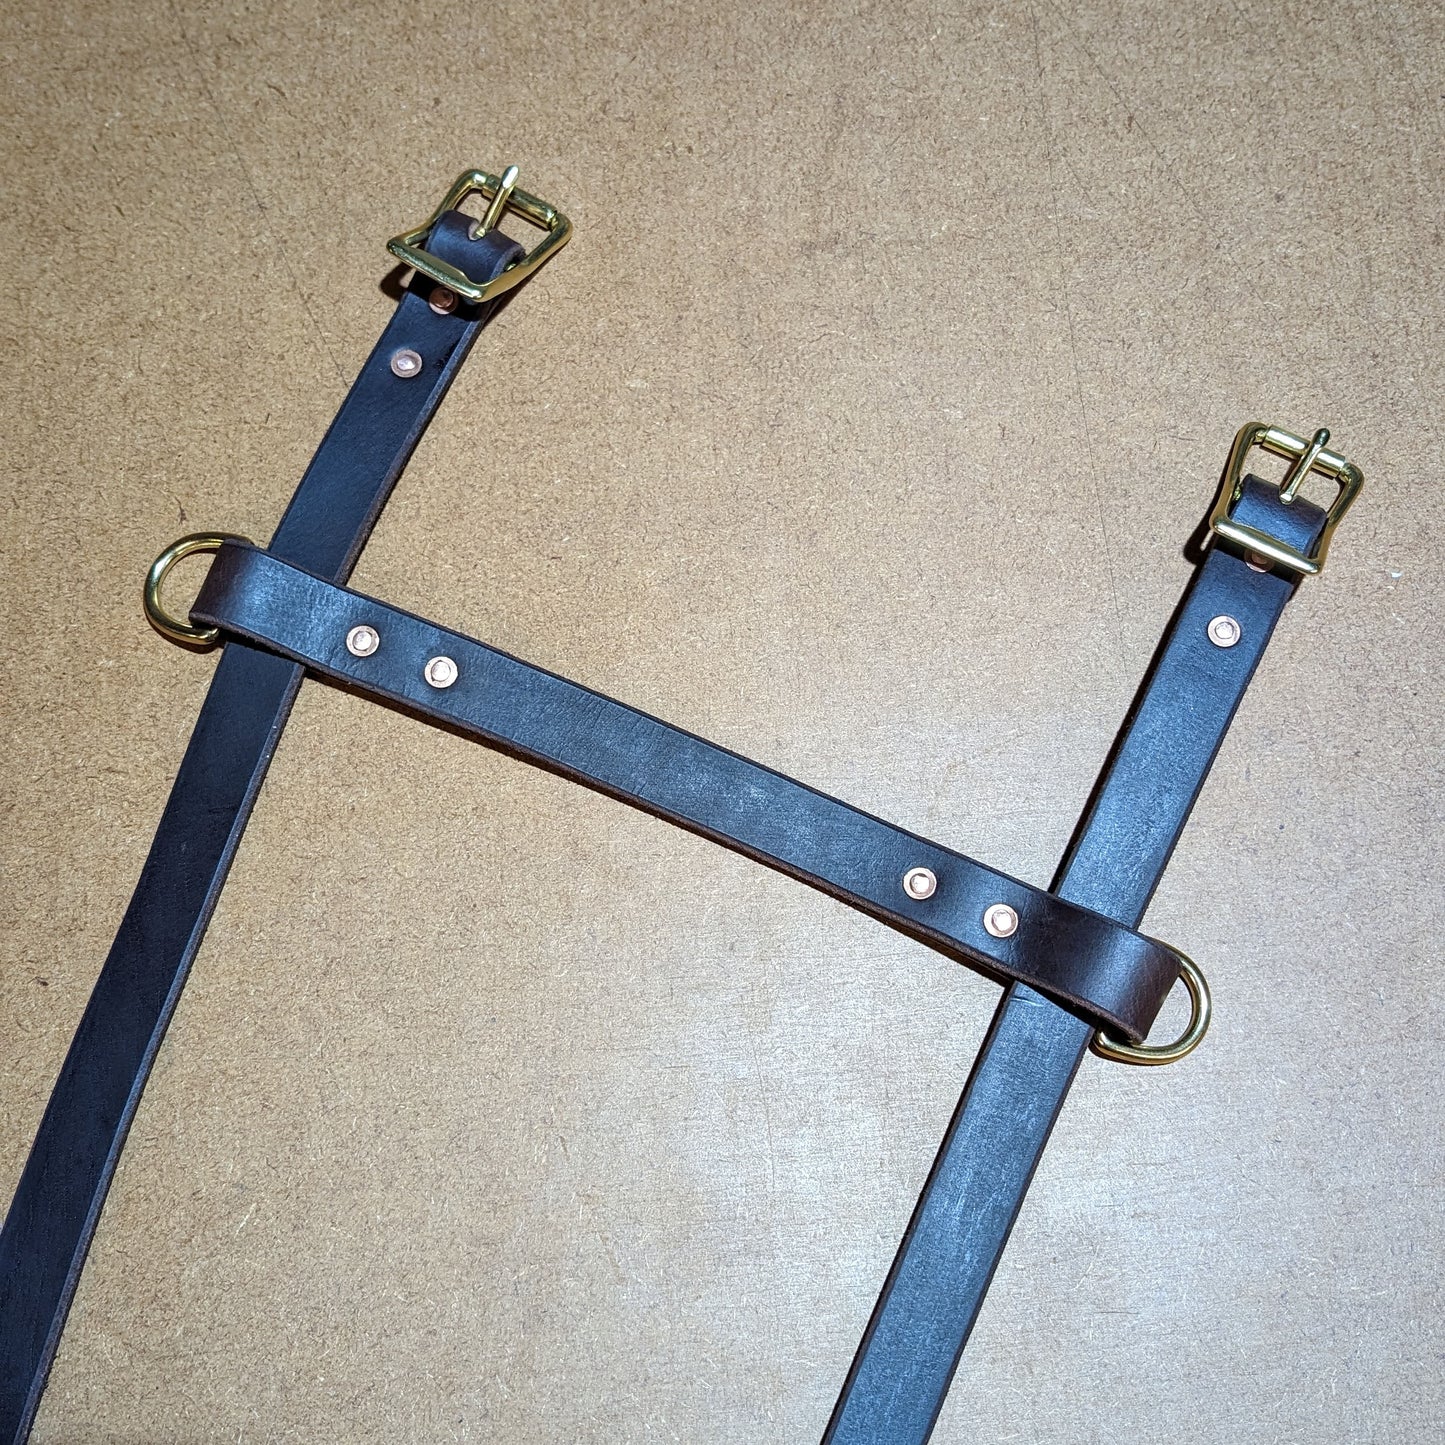 Leather & Brass Utility Straps / Carry System